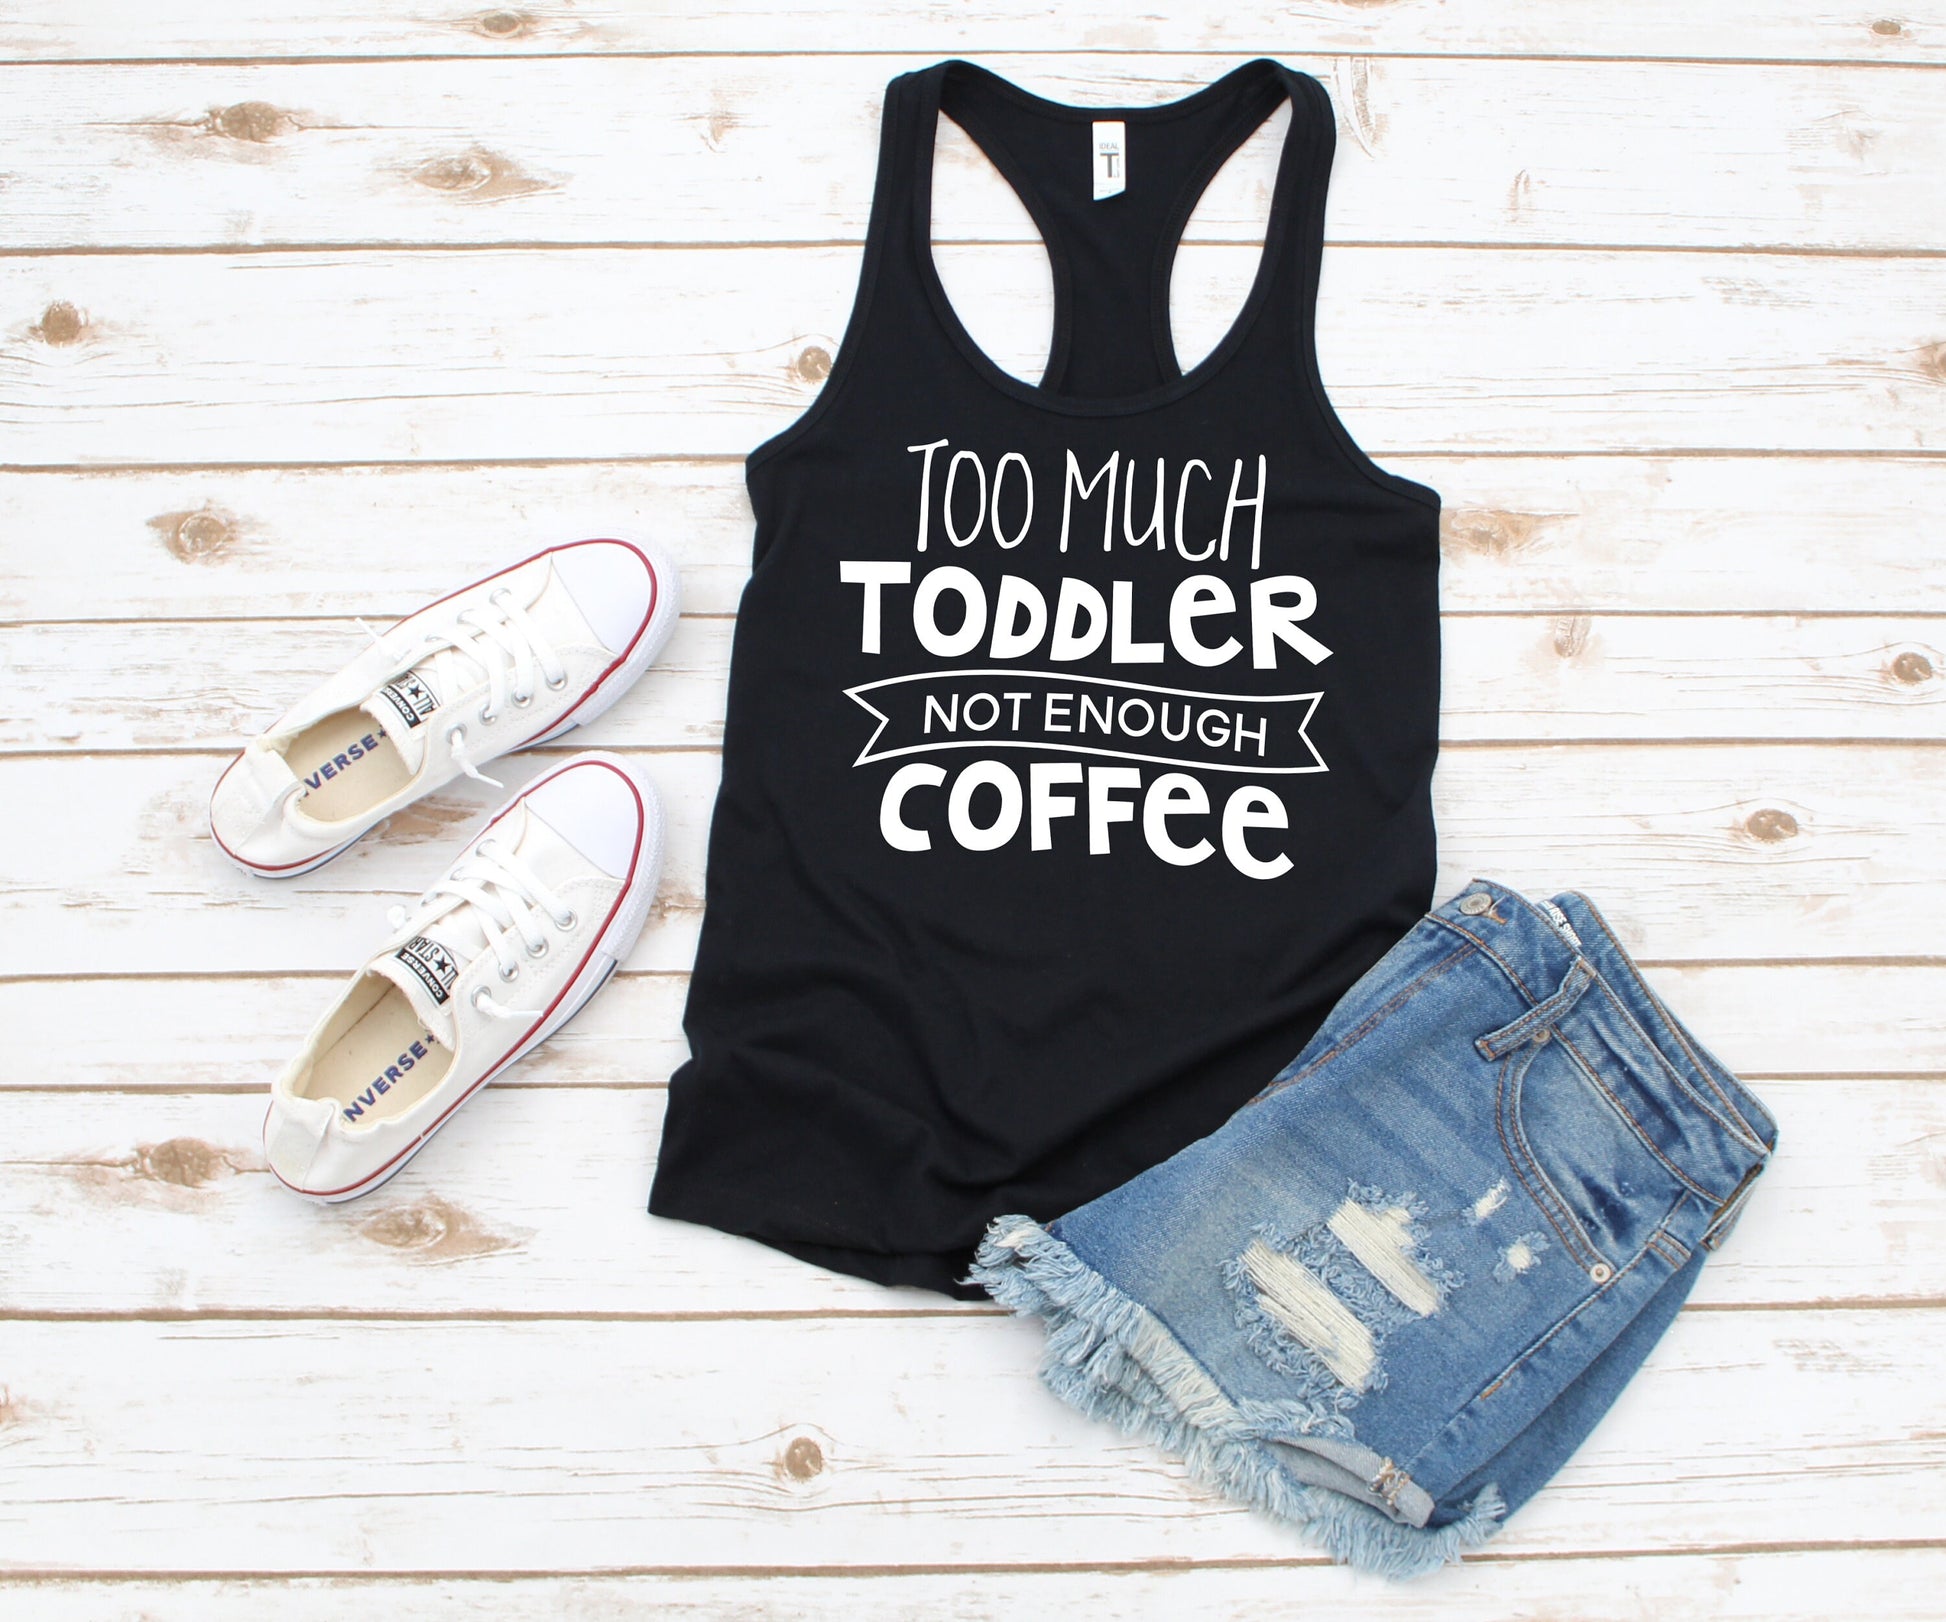 Too Much Toddler, Not Enough Coffee racerback tank t-shirt - toddler mom - mama needs coffee - please send coffee - terrible twos